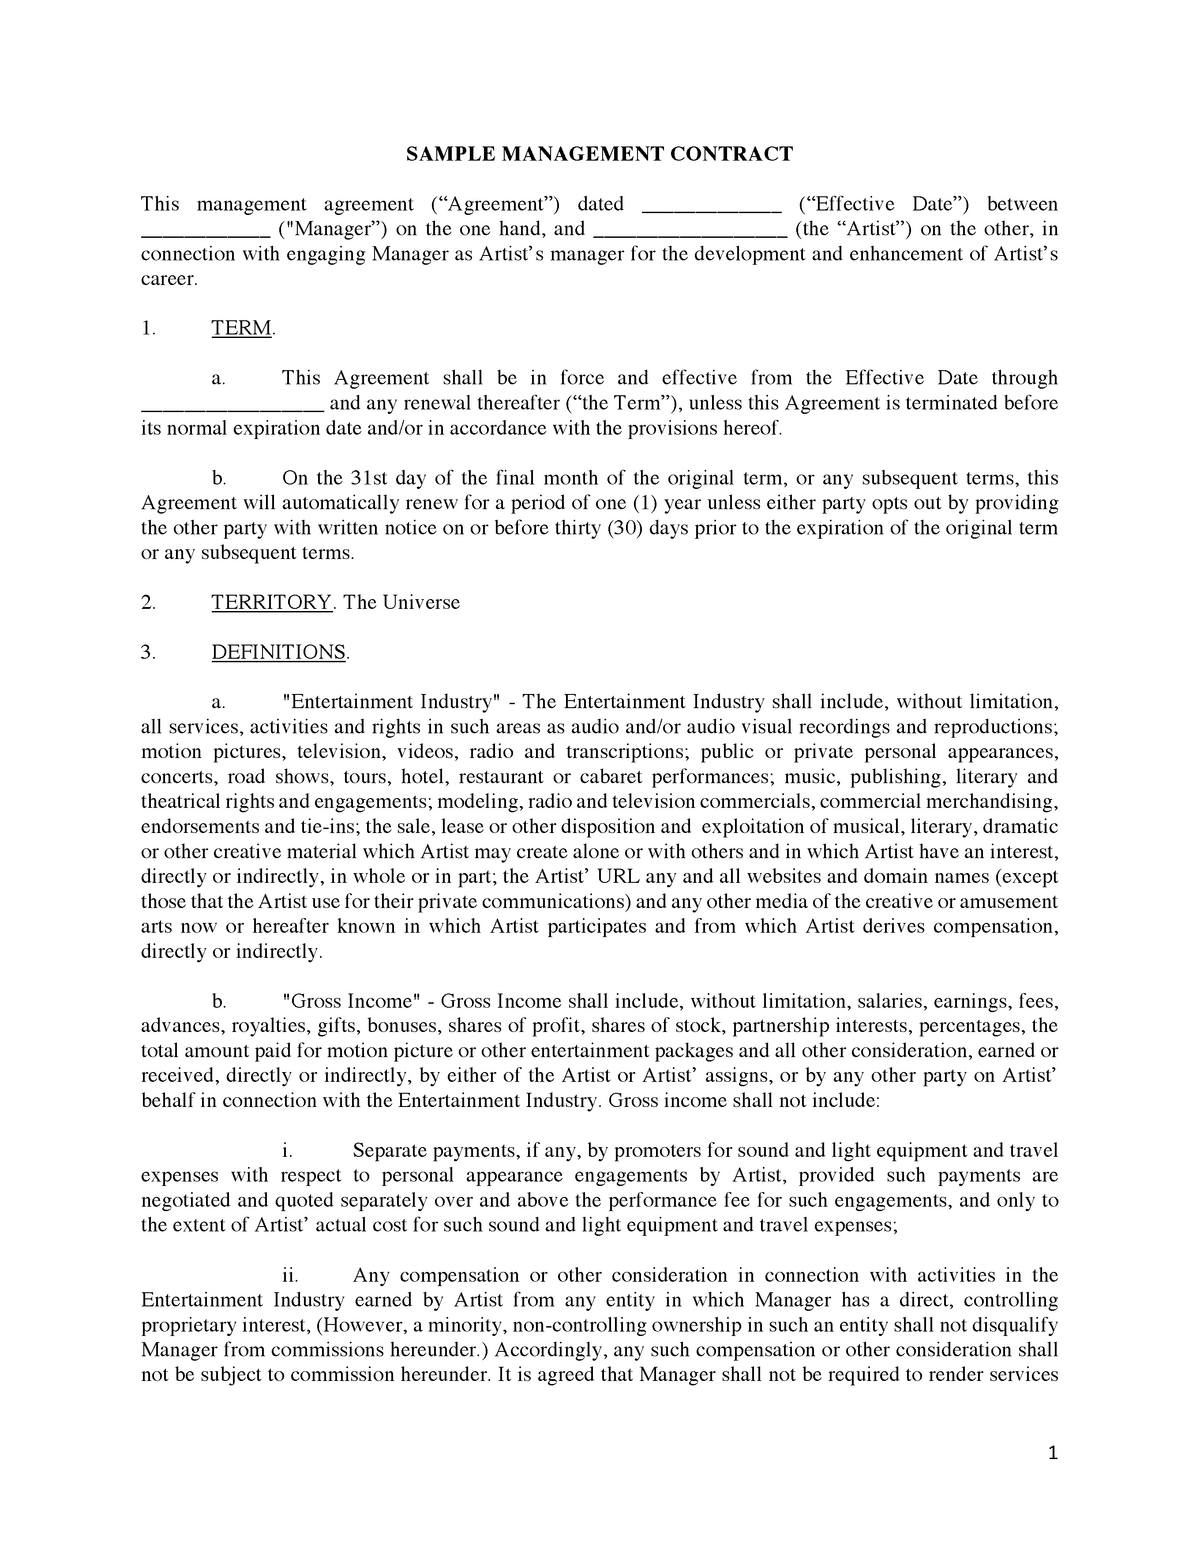 Sample-Mgmt-Contract - SAMPLE MANAGEMENT CONTRACT This management Intended For artist management contract templates